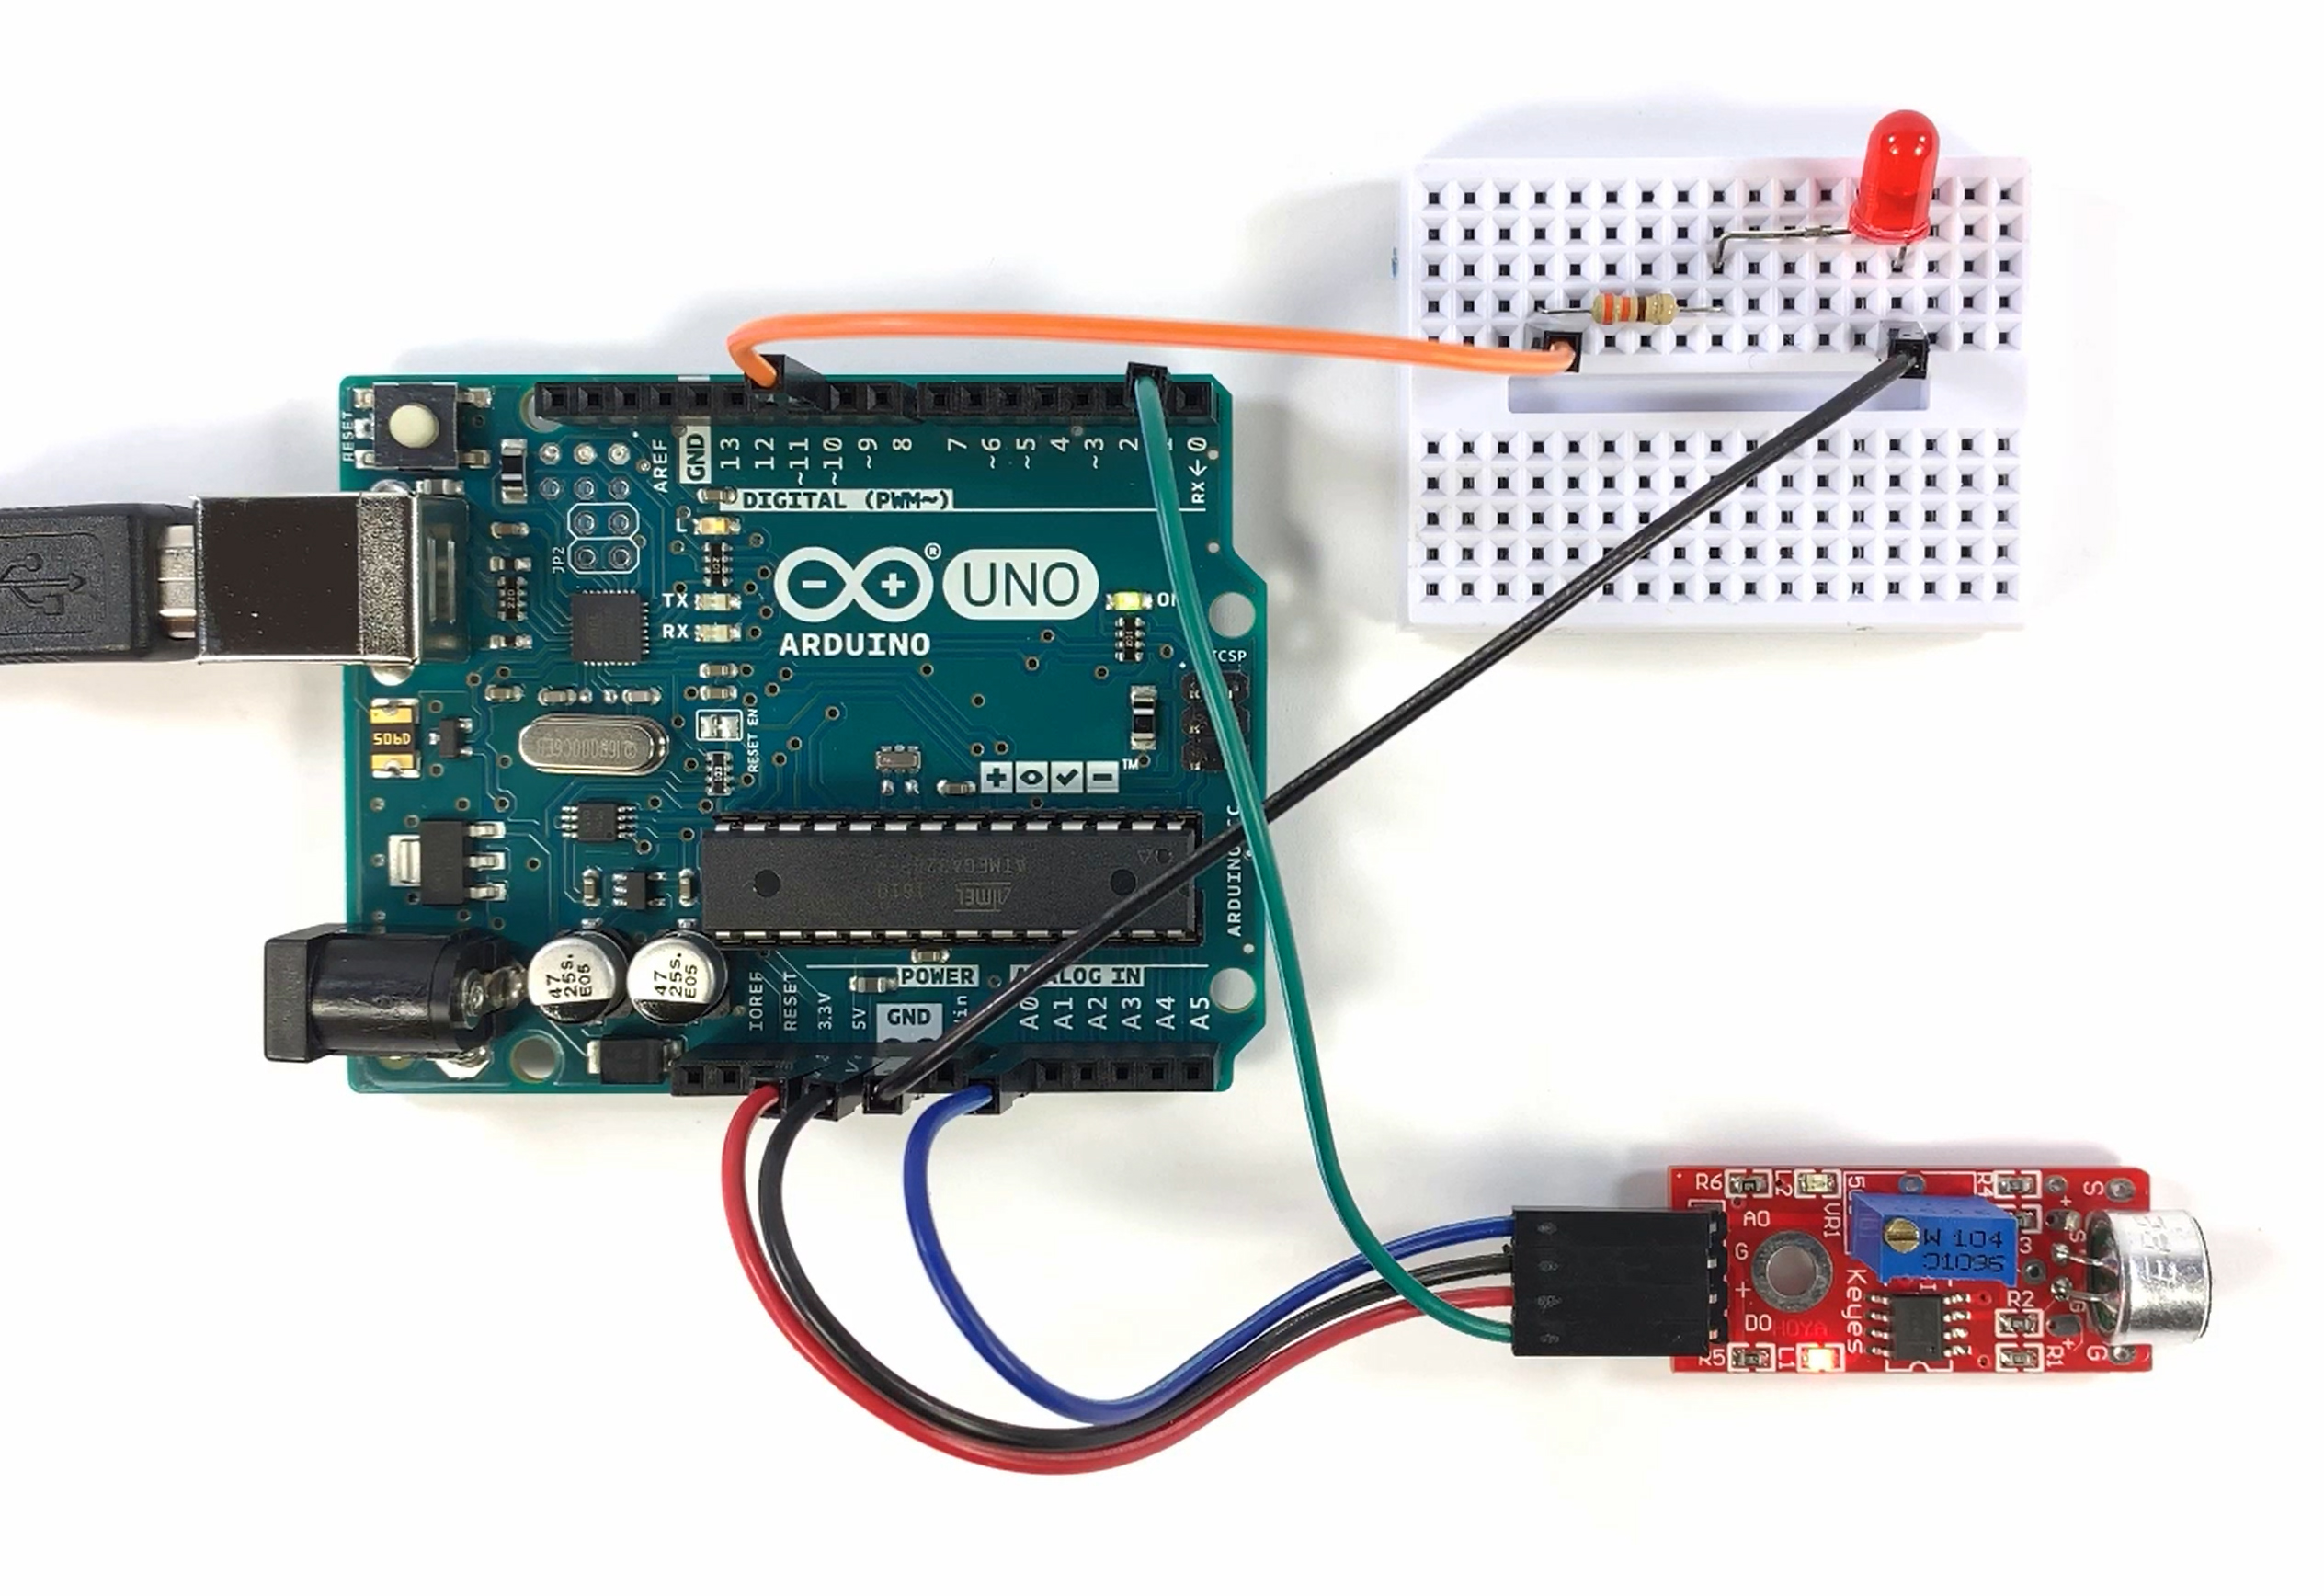 How to Use Microphones on the Arduino - Circuit Basics